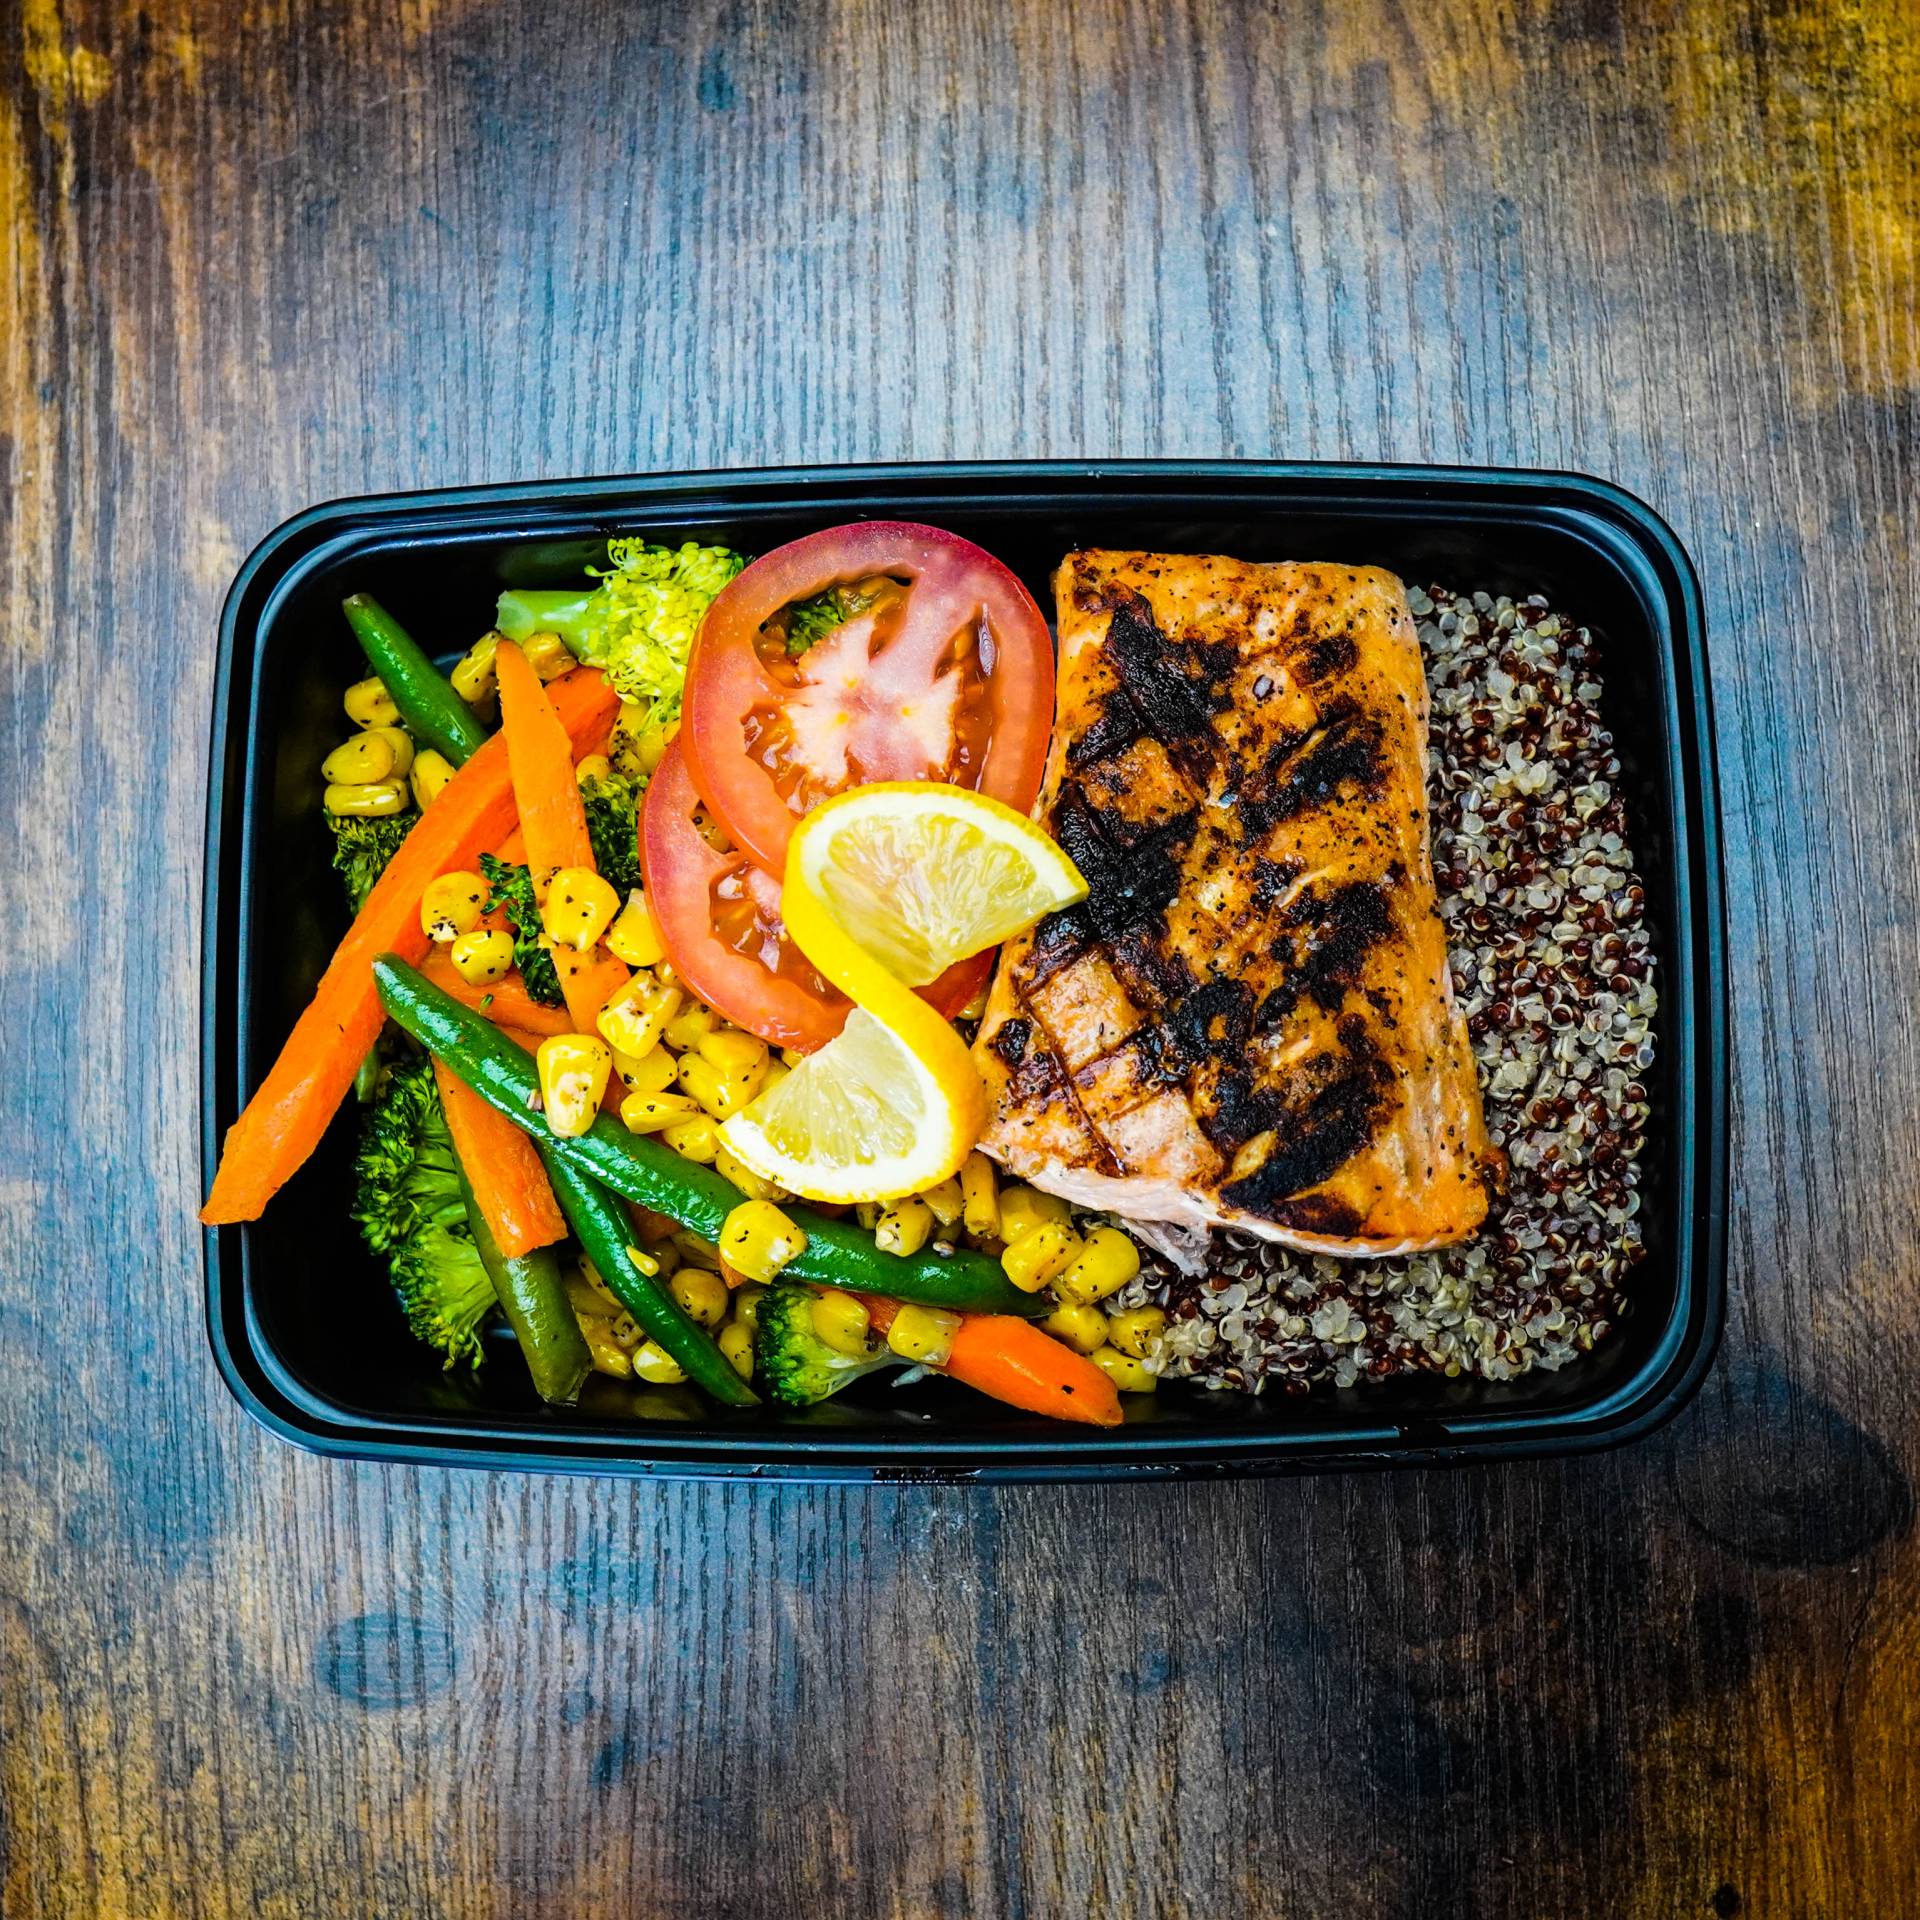 Grilled Salmon with Quinoa & Vegetables